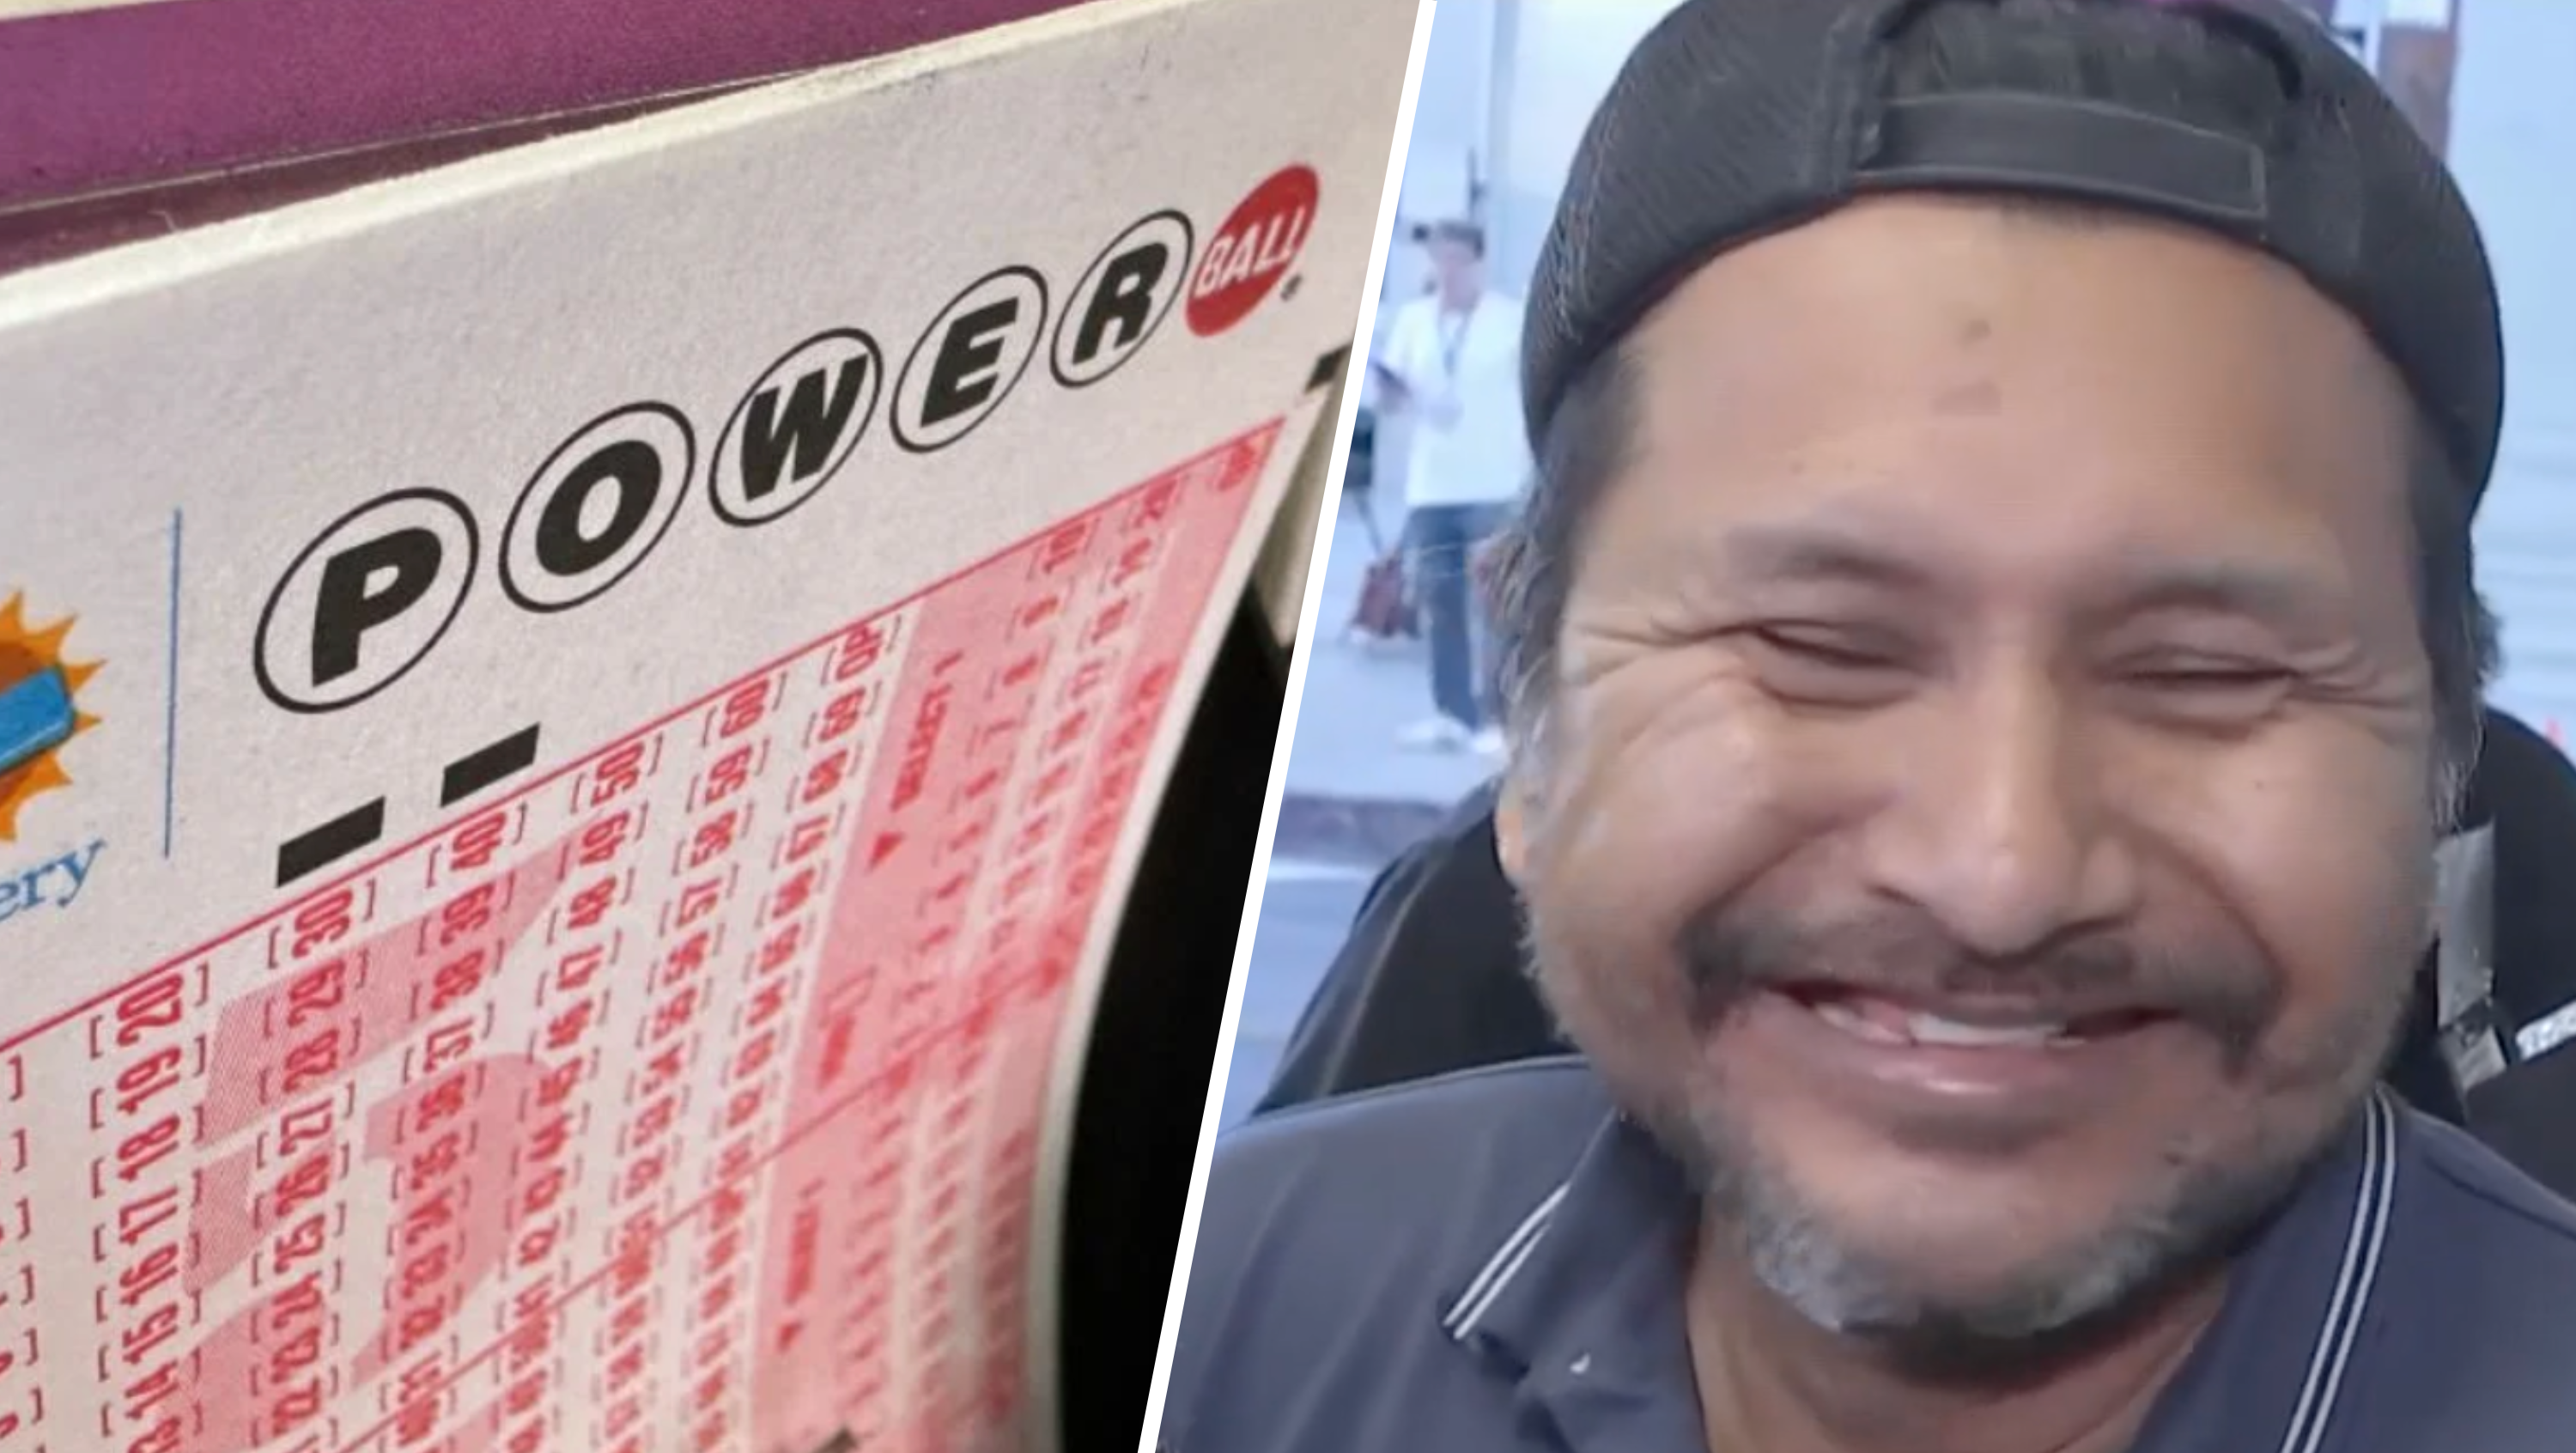 Downtown LA store owner shocked at selling winning Powerball ticket – NBC  Los Angeles